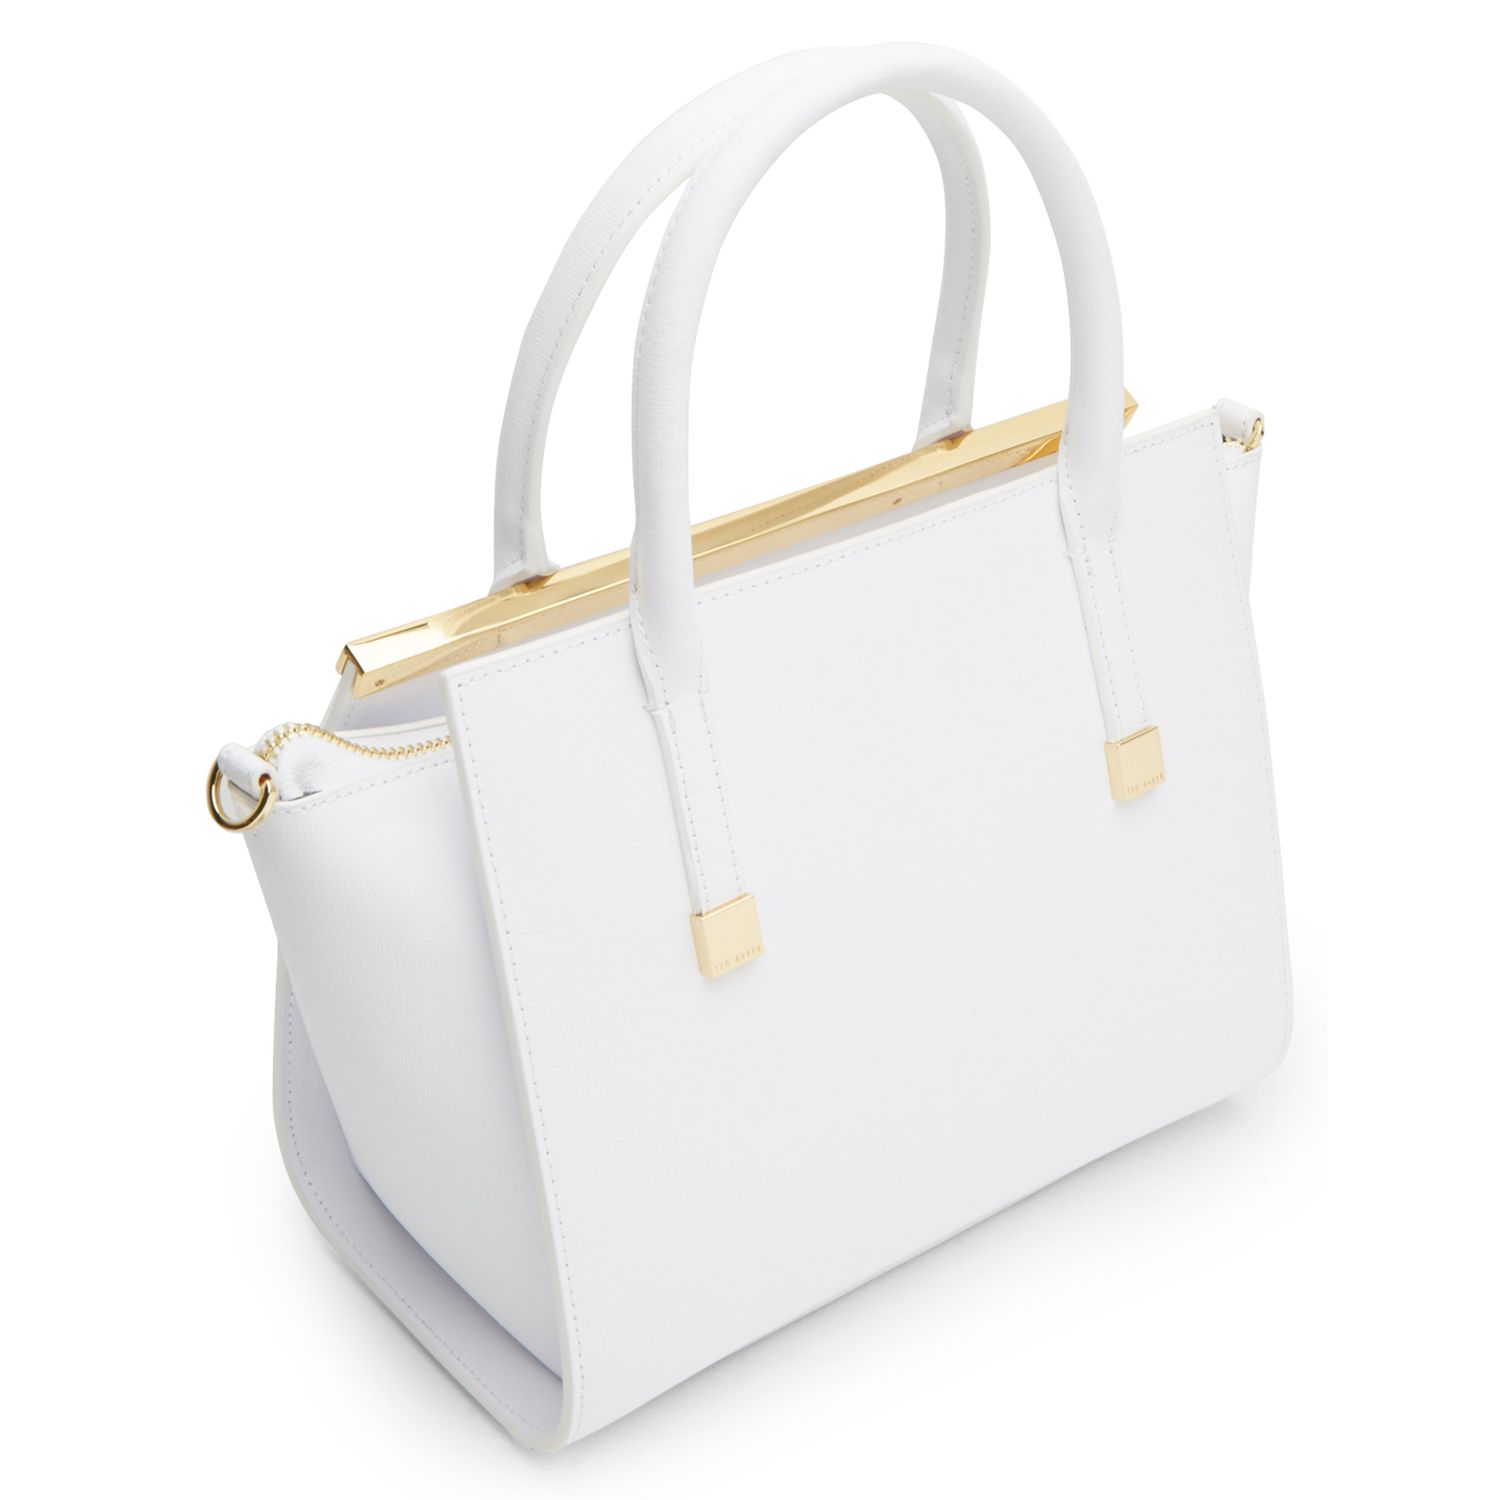 Ted Baker Trudy Leather Tote Bag, White at John Lewis & Partners